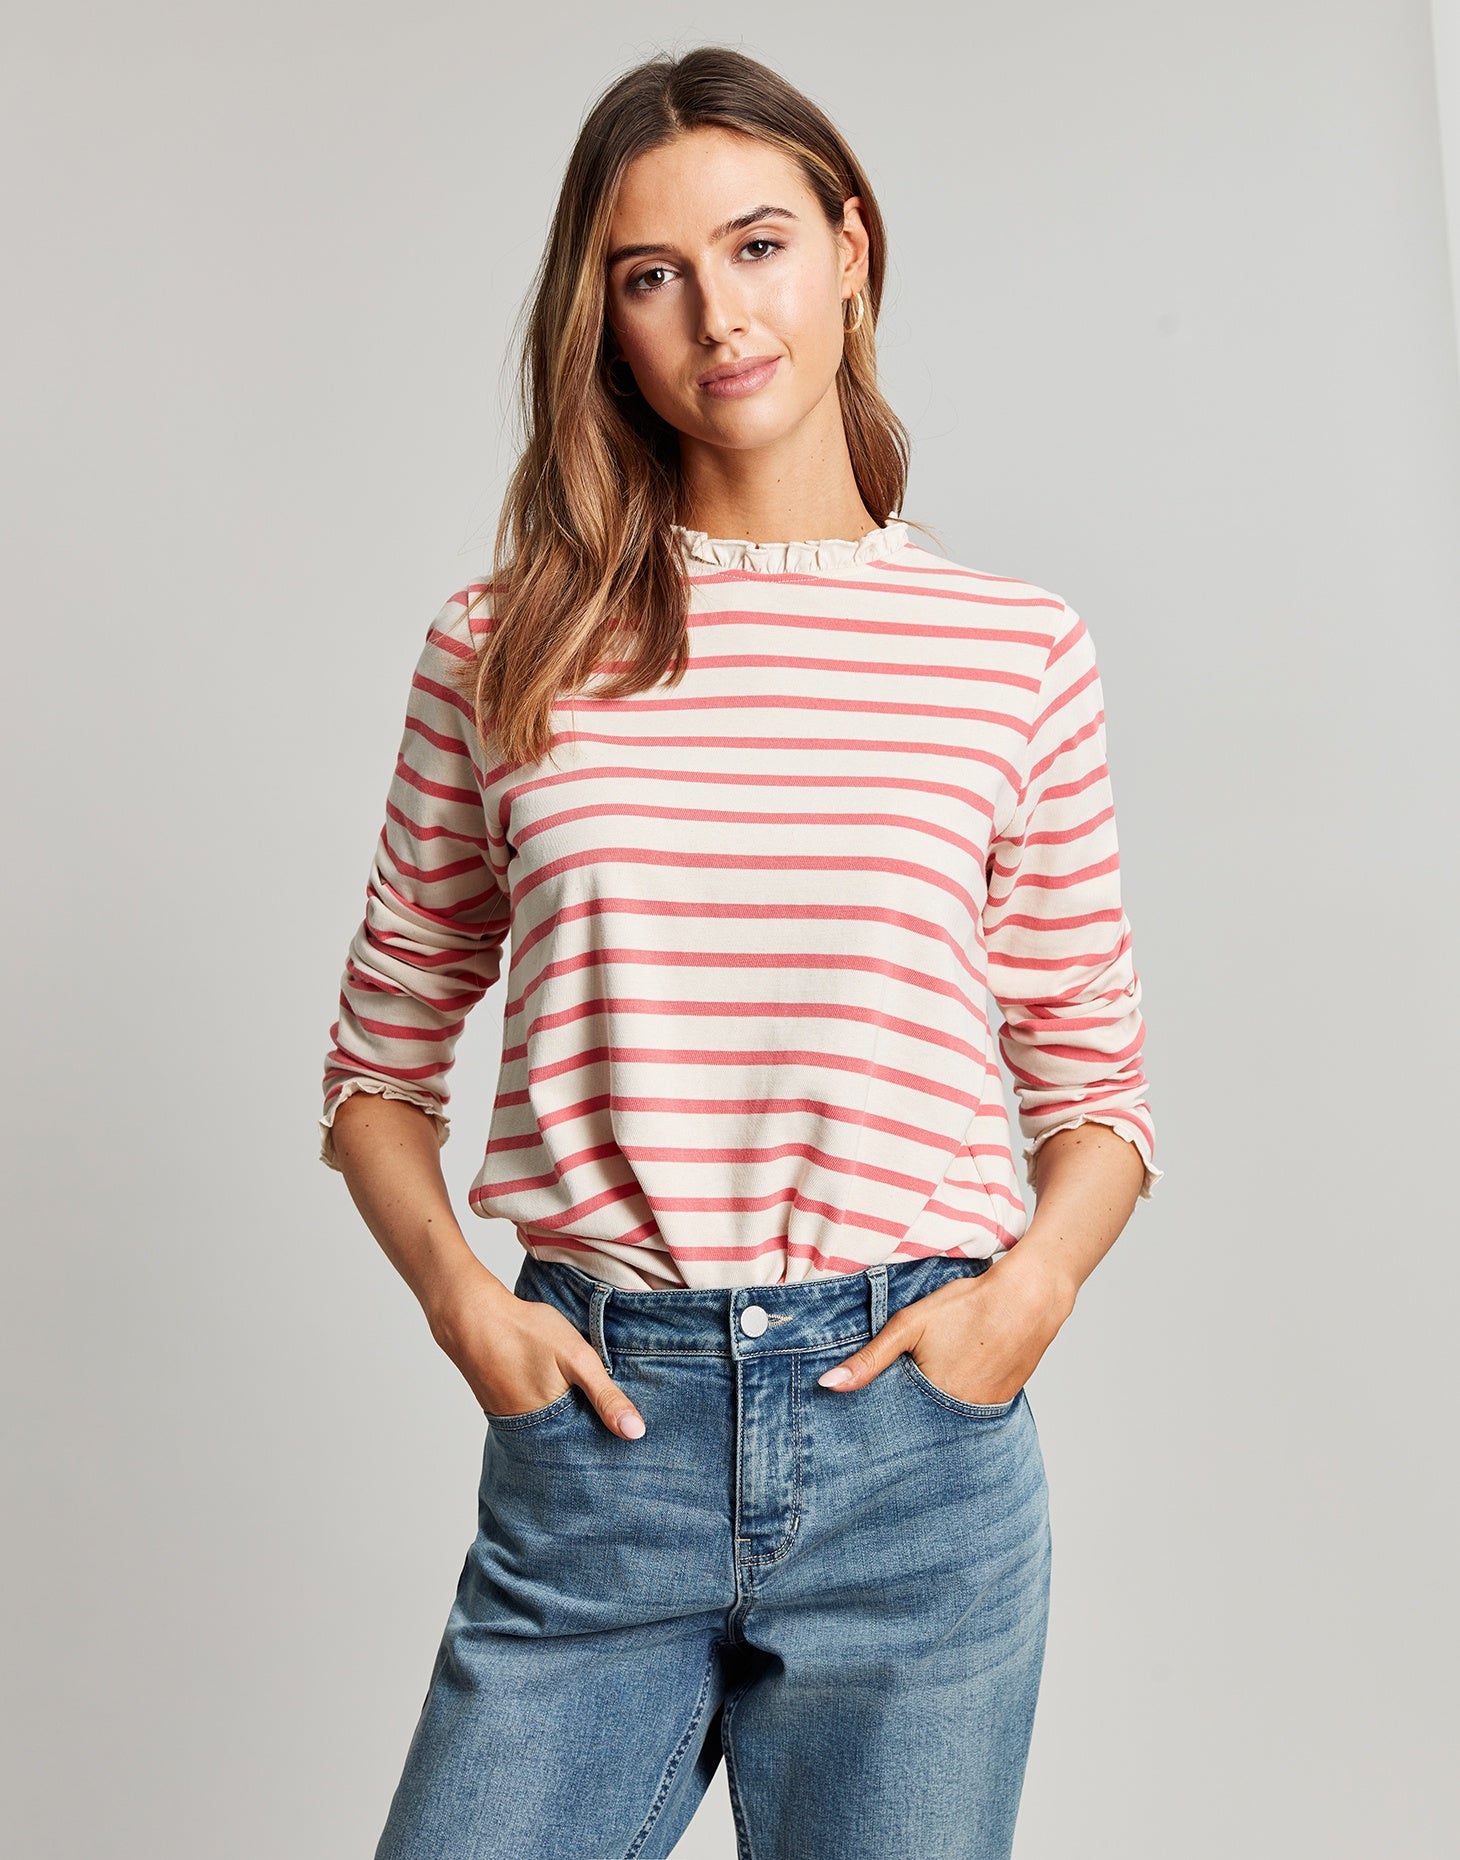 Daisy Long Sleeve Top with Frill - Coral Stripe